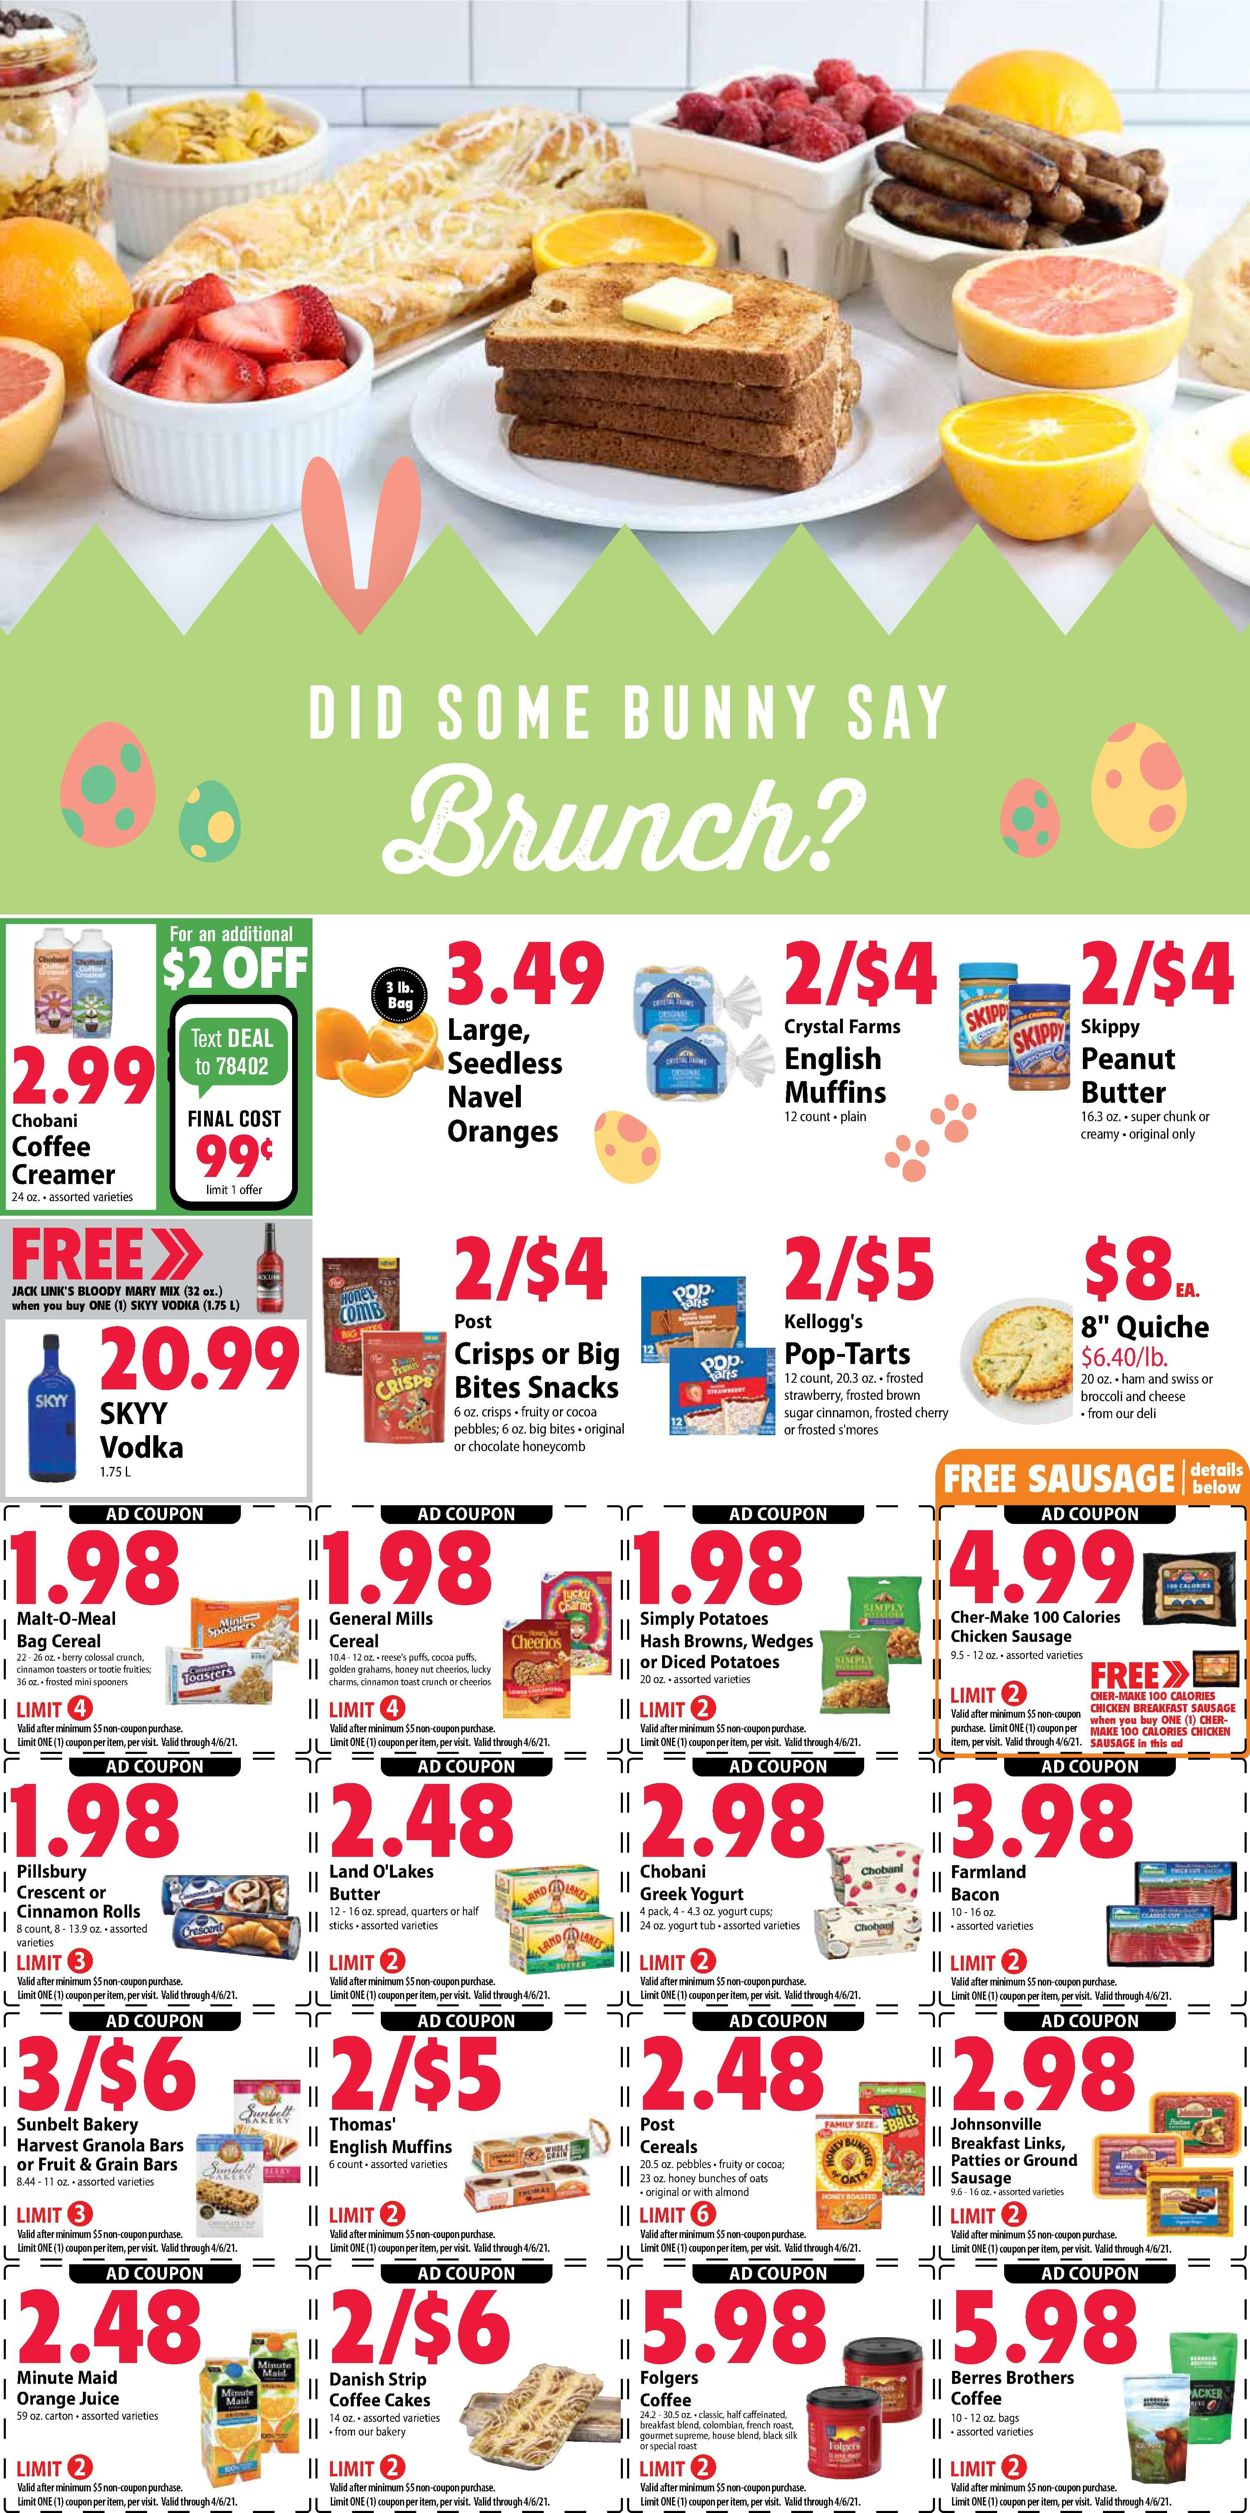 Festival Foods Easter 2021 ad Current weekly ad 03/31 - 04/06/2021 [6 ...